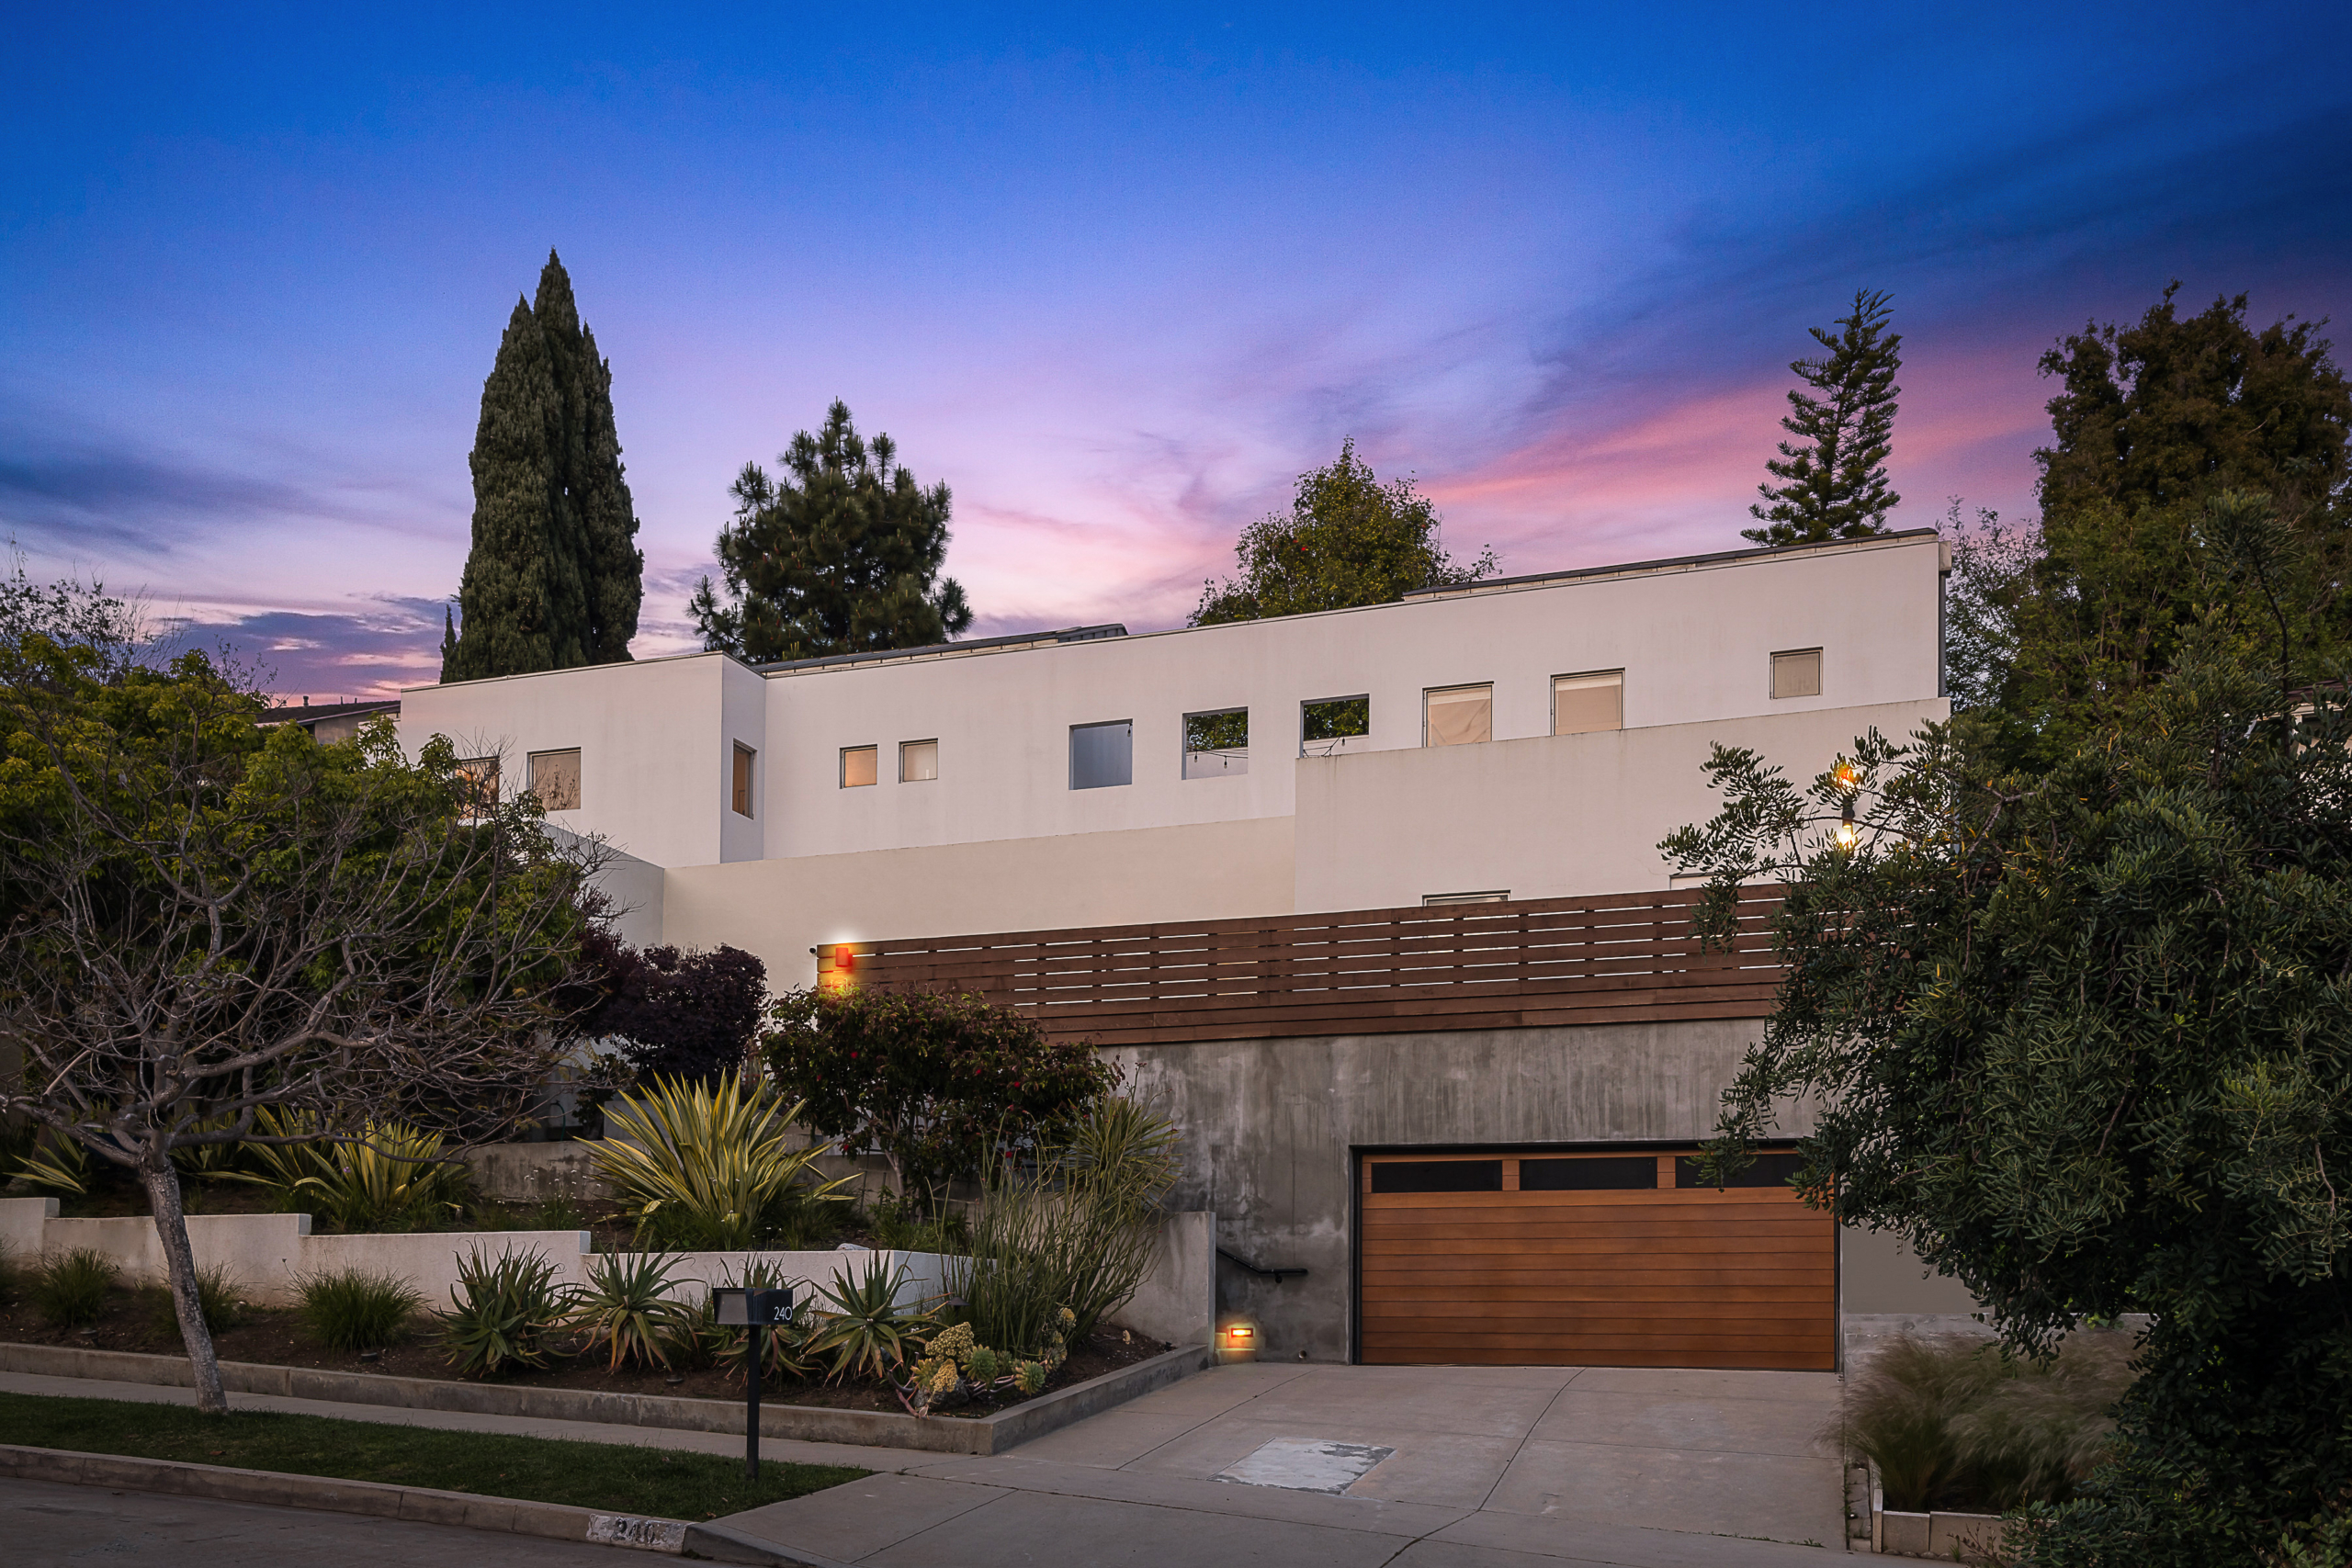 Beautiful modern estate with Mid-century modern facade and concrete planter landscaping